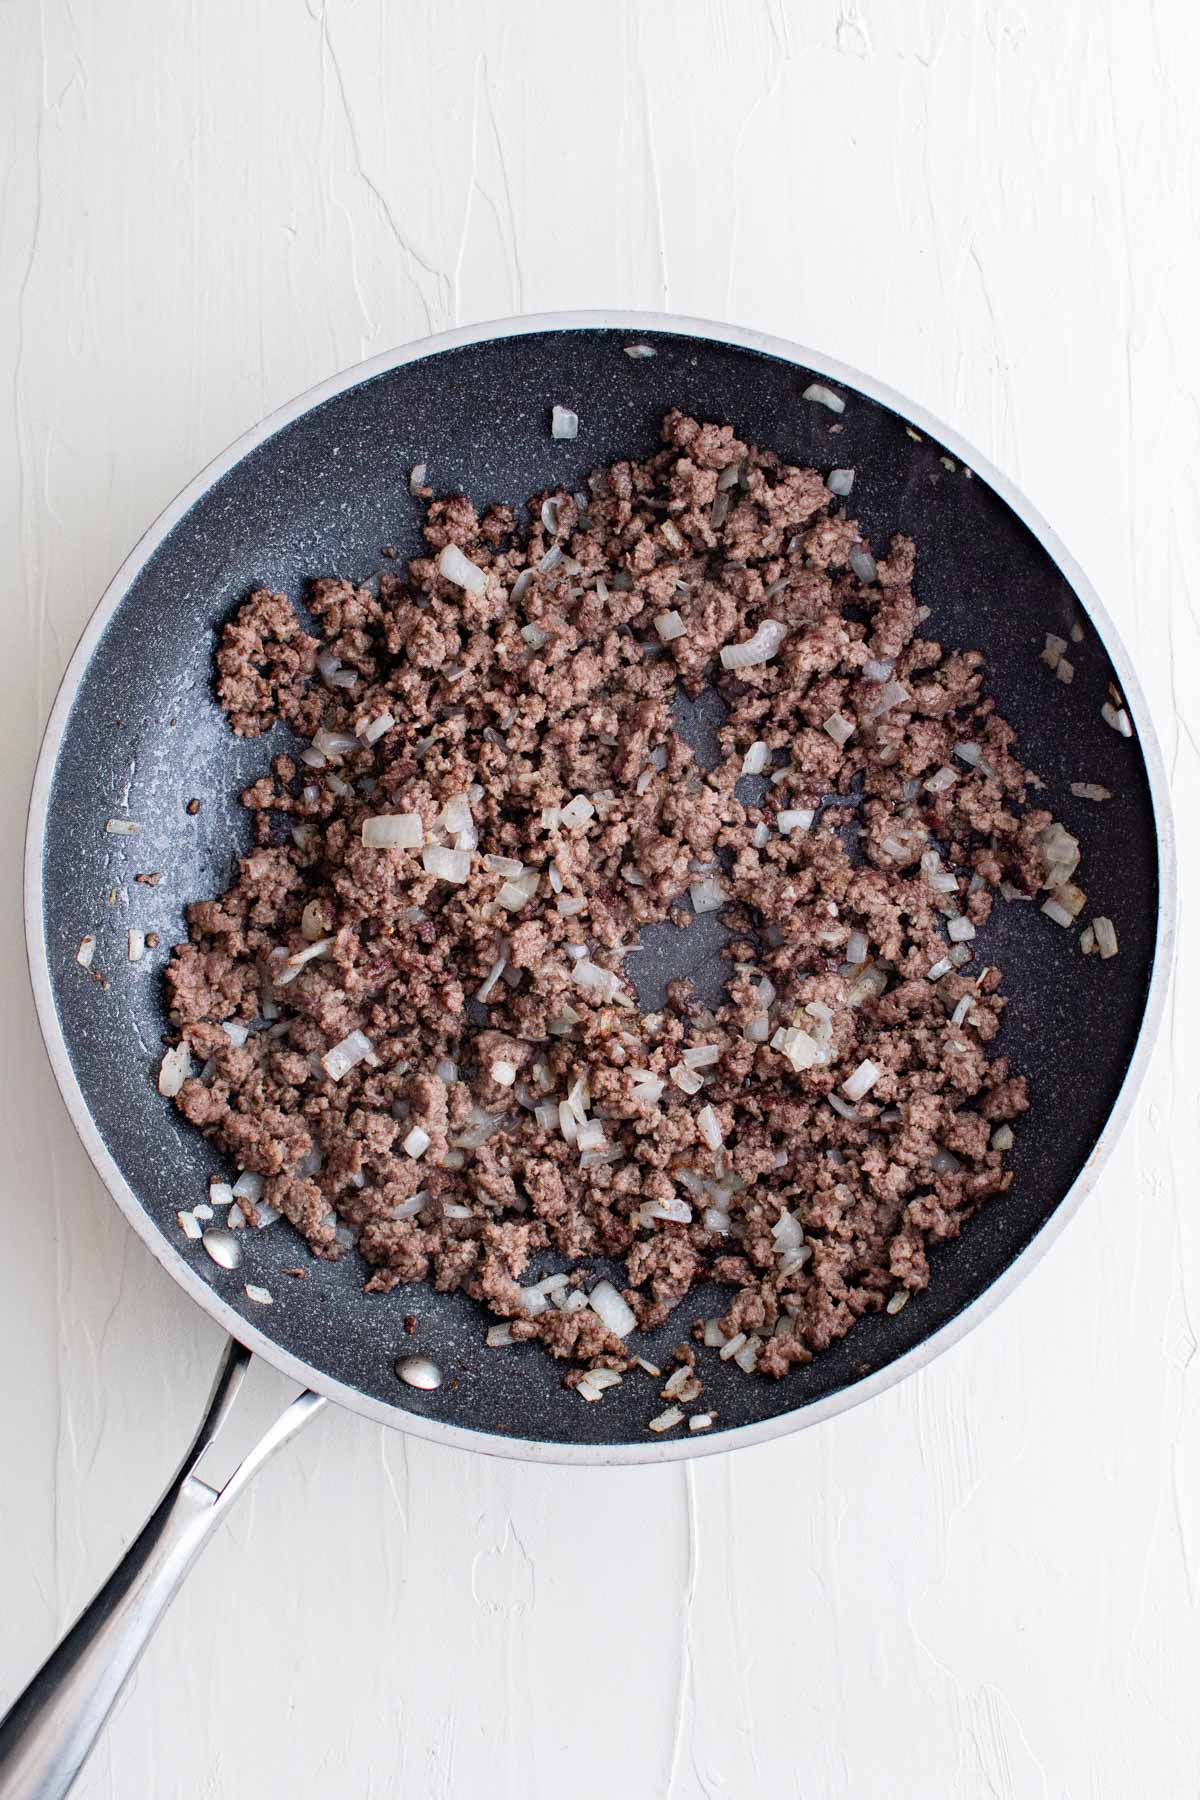 Cooked ground beef and onions in a skillet.